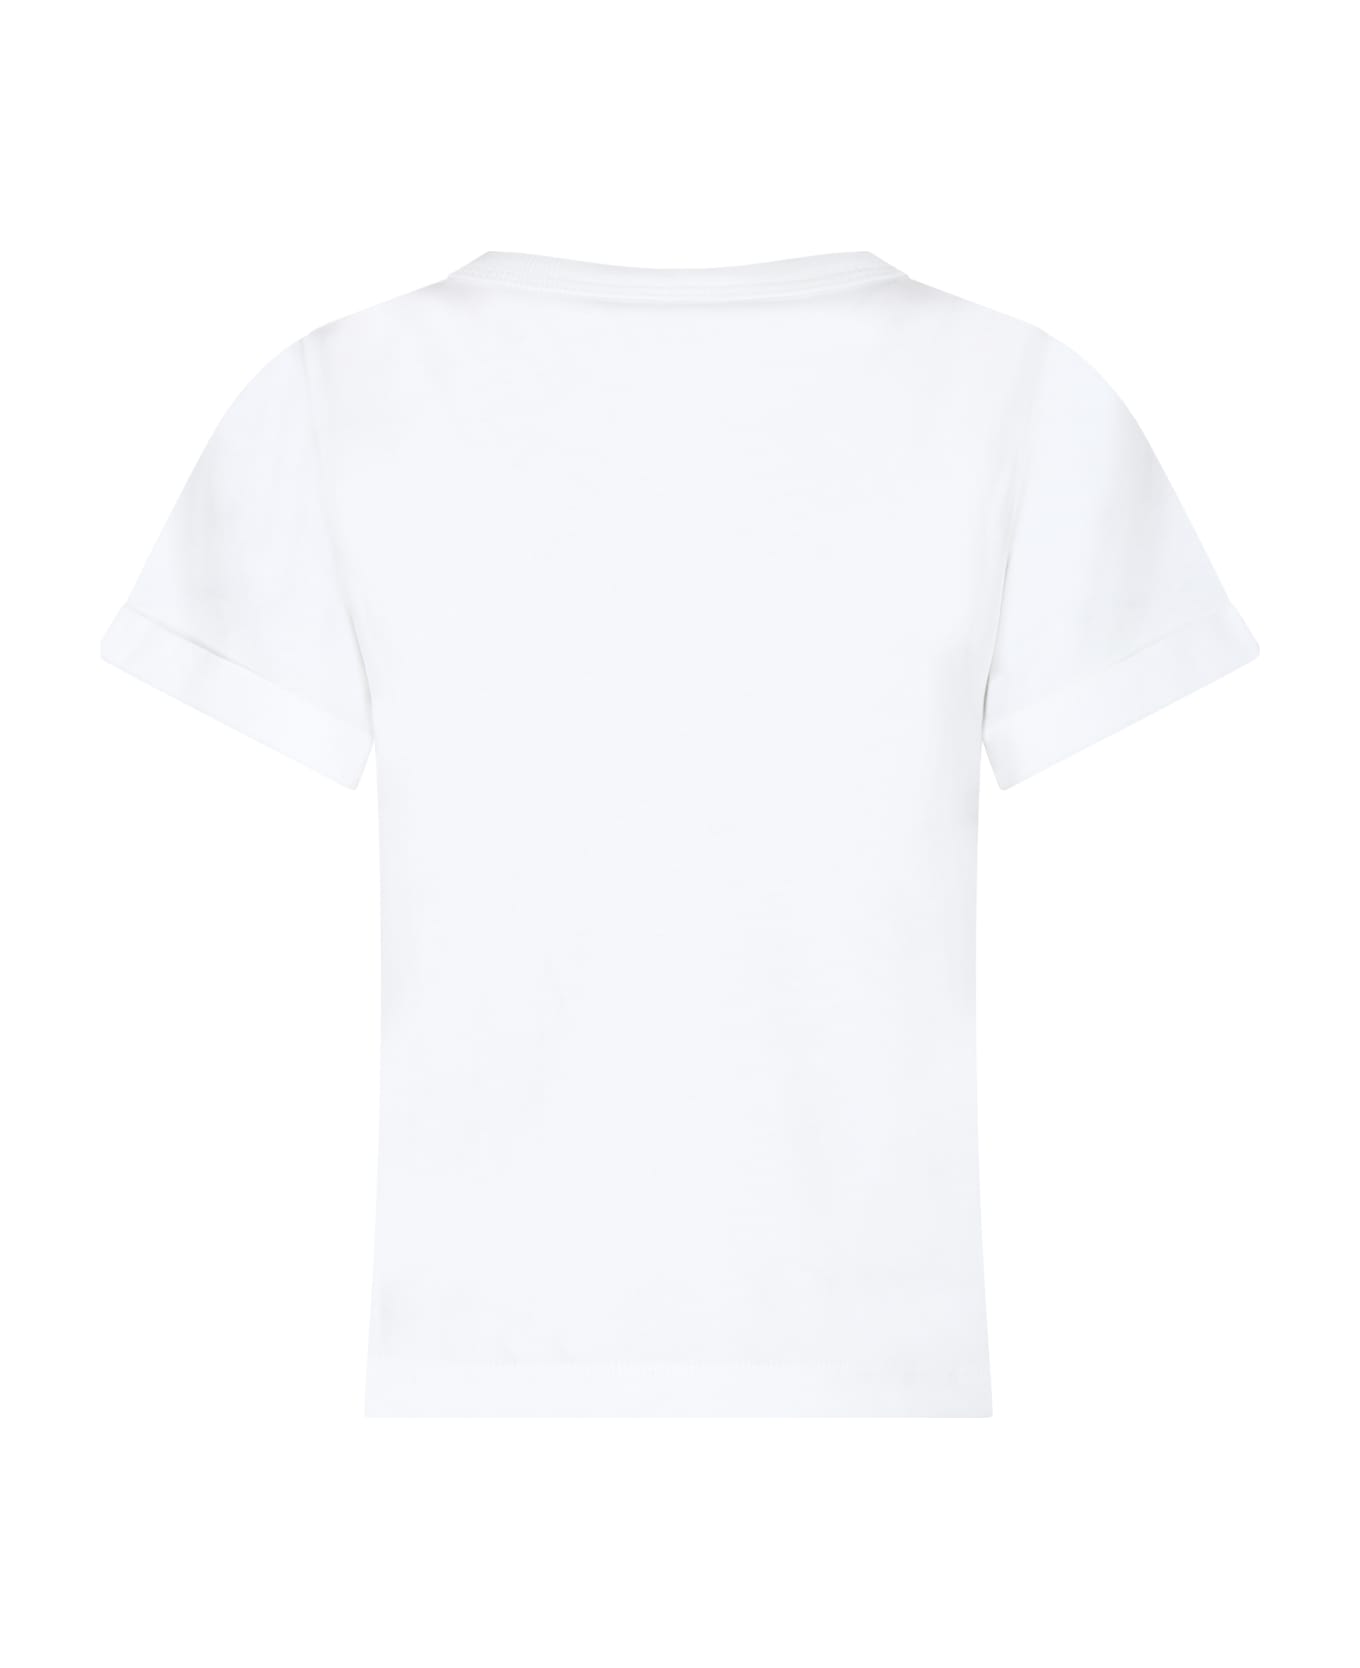 Stella McCartney Kids Ivory T-shirt For Girl With Flower Print And Writing - Ivory